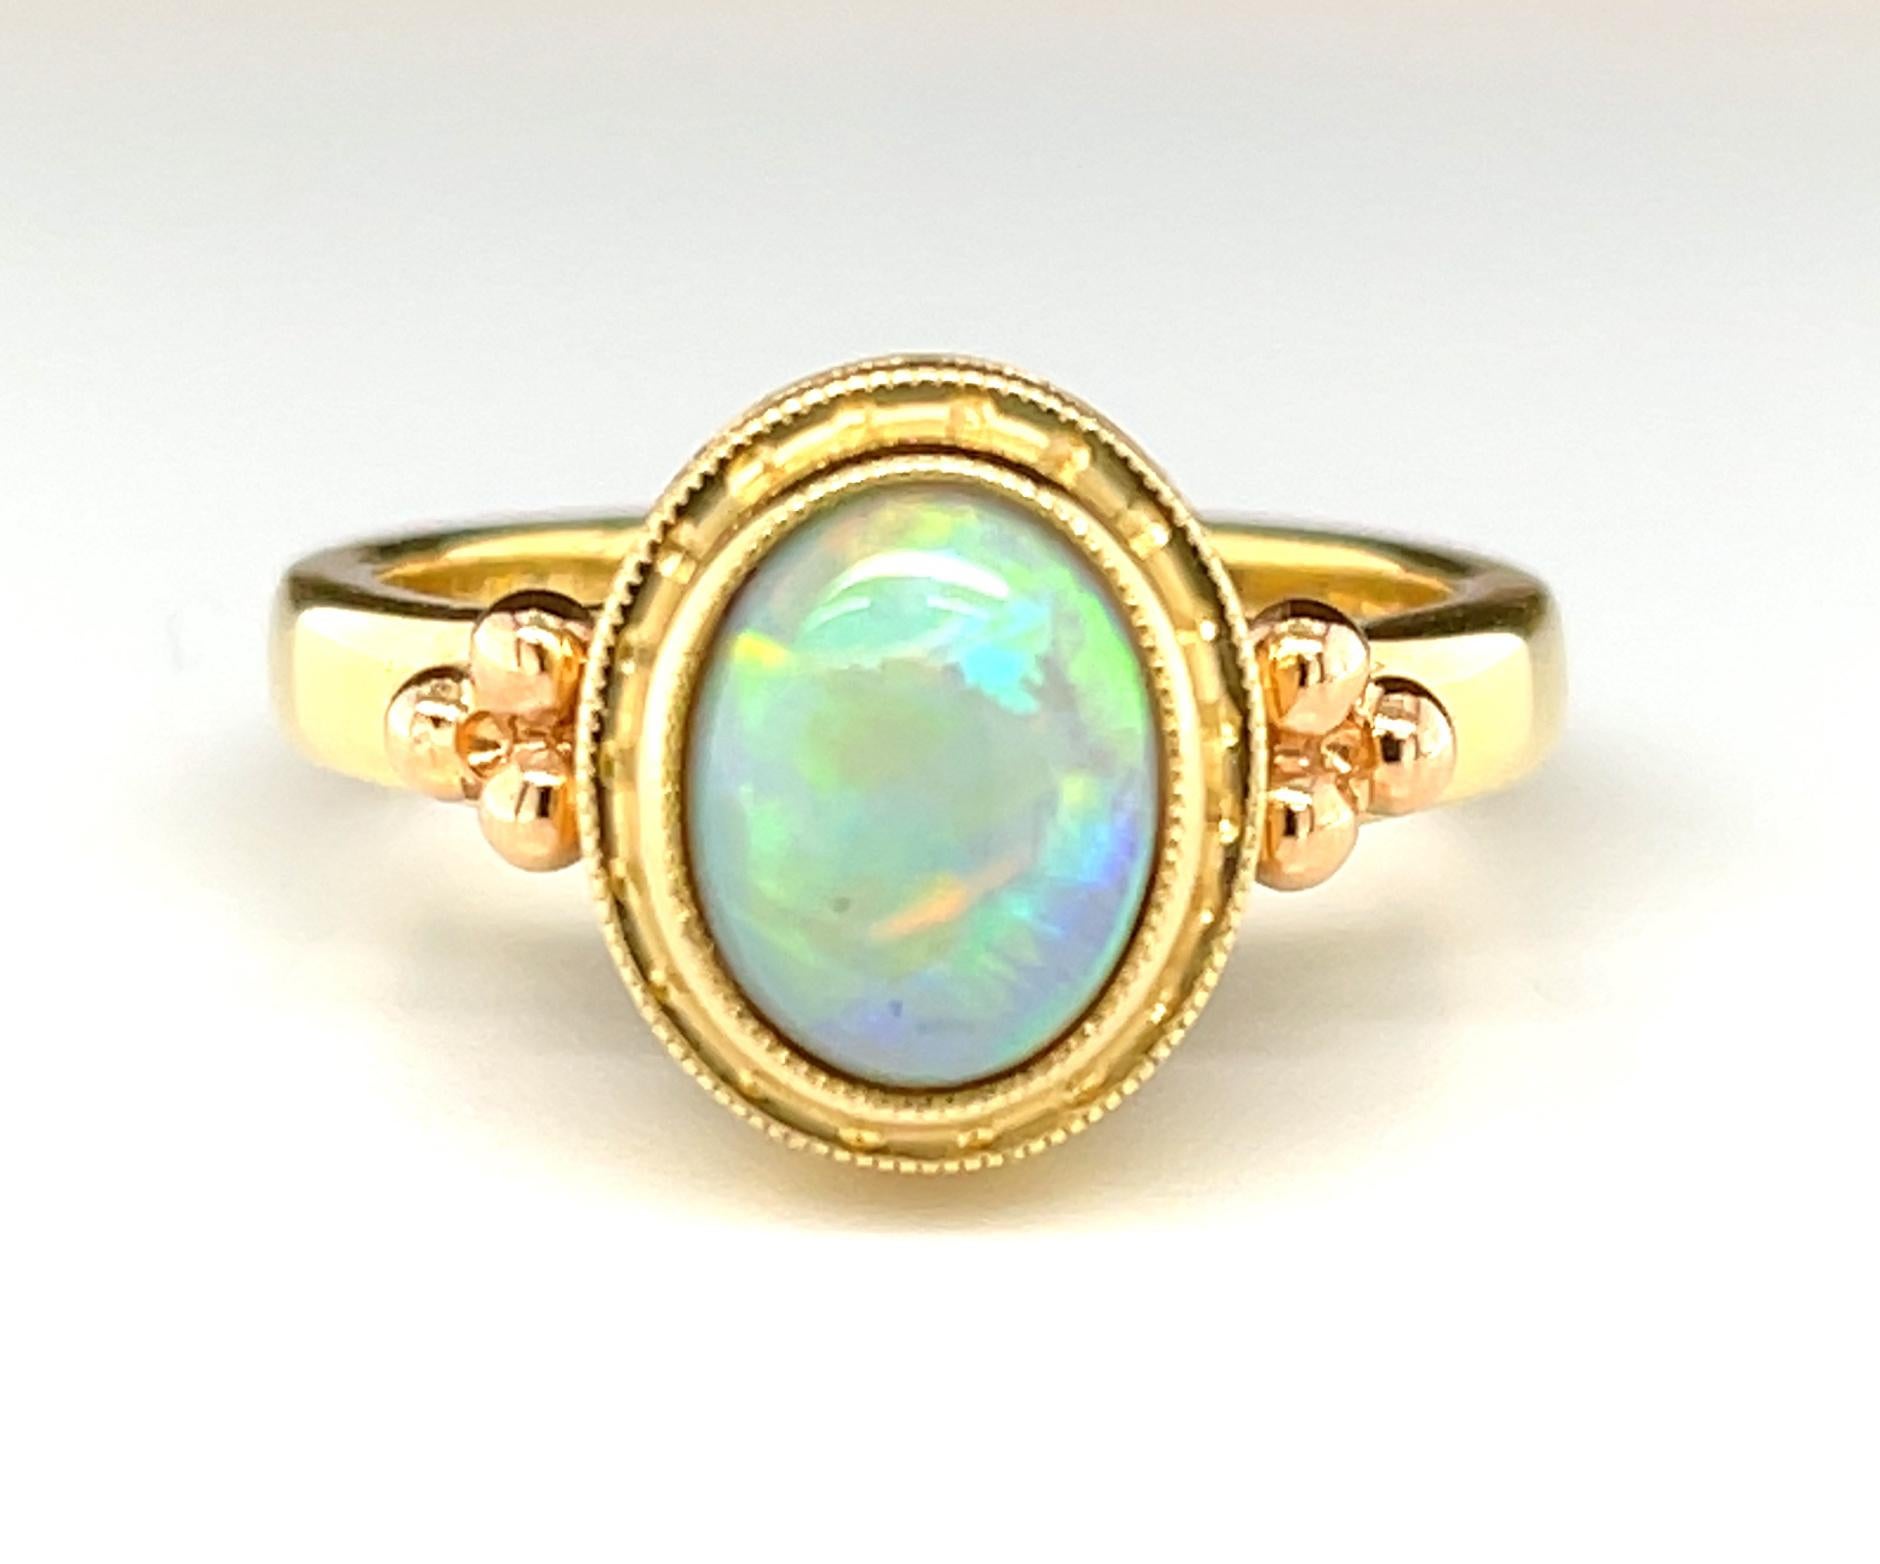 This rich black opal ring will add a touch of colorful elegance to every day! Featuring a 1.28 carat opal with beautiful play-of-color, this chic and sophisticated ring was handmade in 18k yellow gold by our Master Jewelers in Los Angeles using